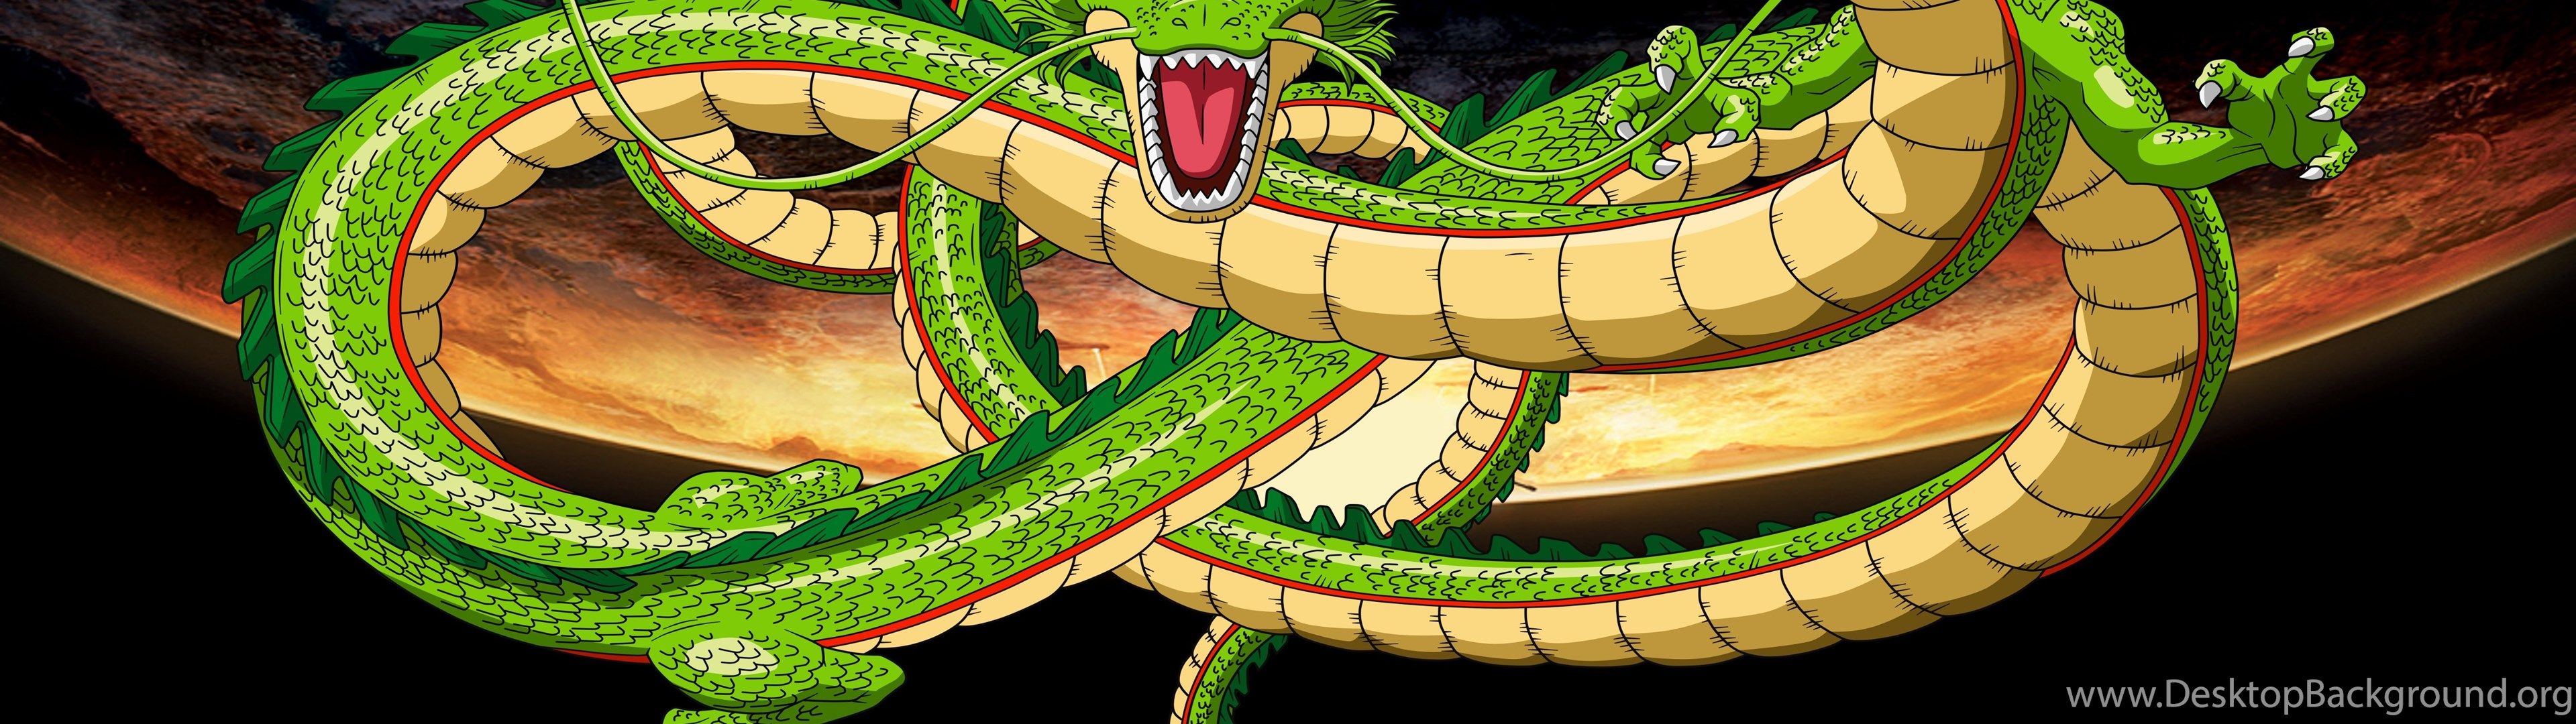 Here Is A Shenron Wallpaper I Found While Google ing, Dbz Desktop Background